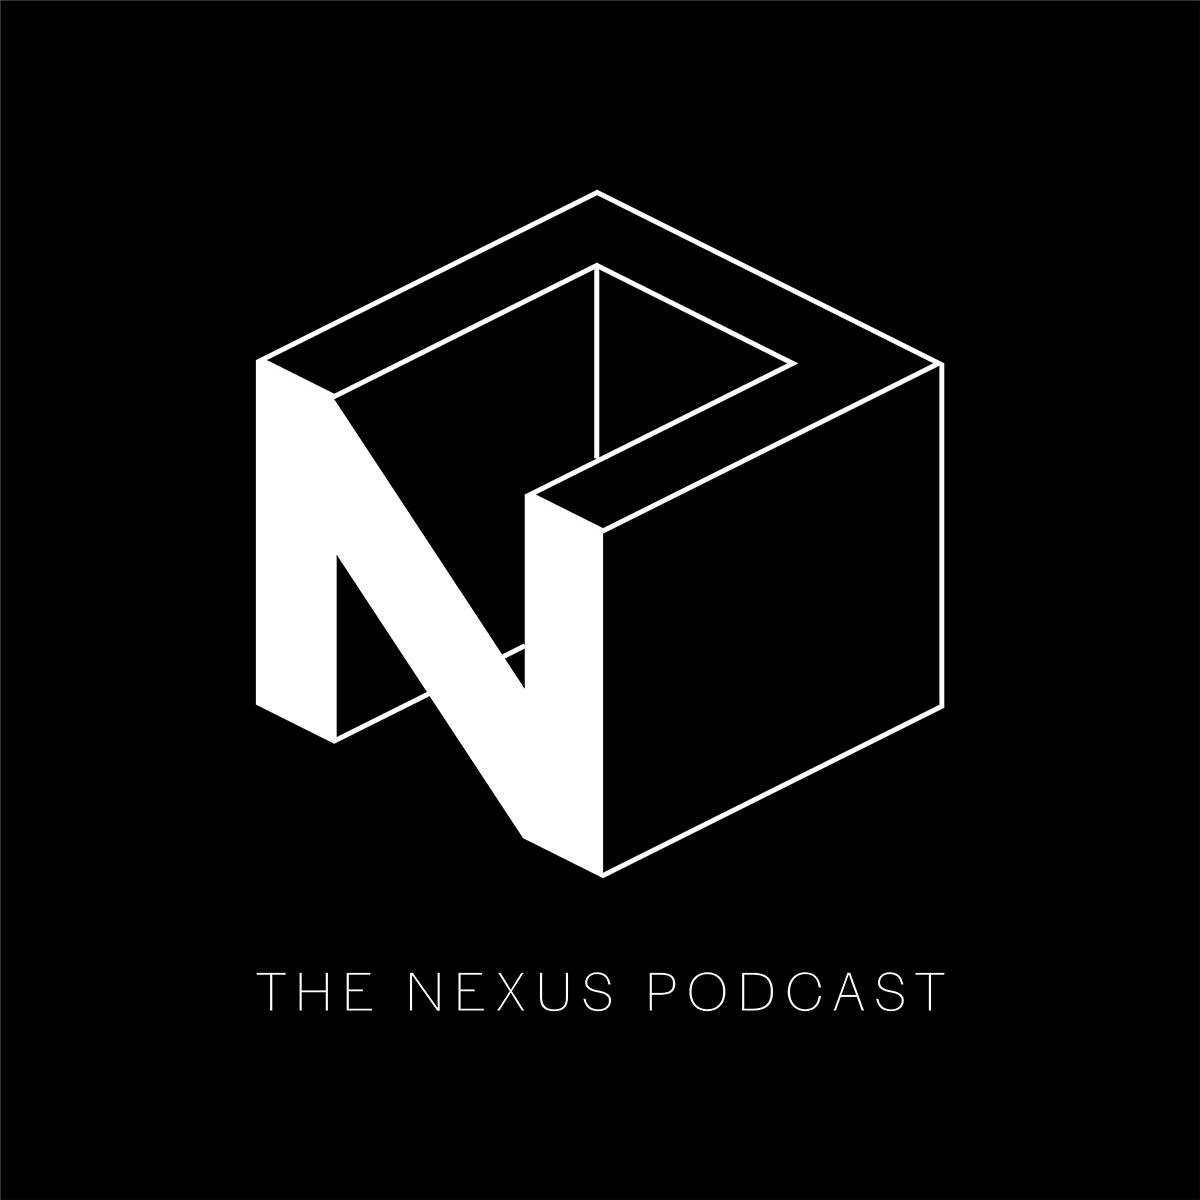 The Nexus Podcast seeks to highlight the work of Black designers and architects